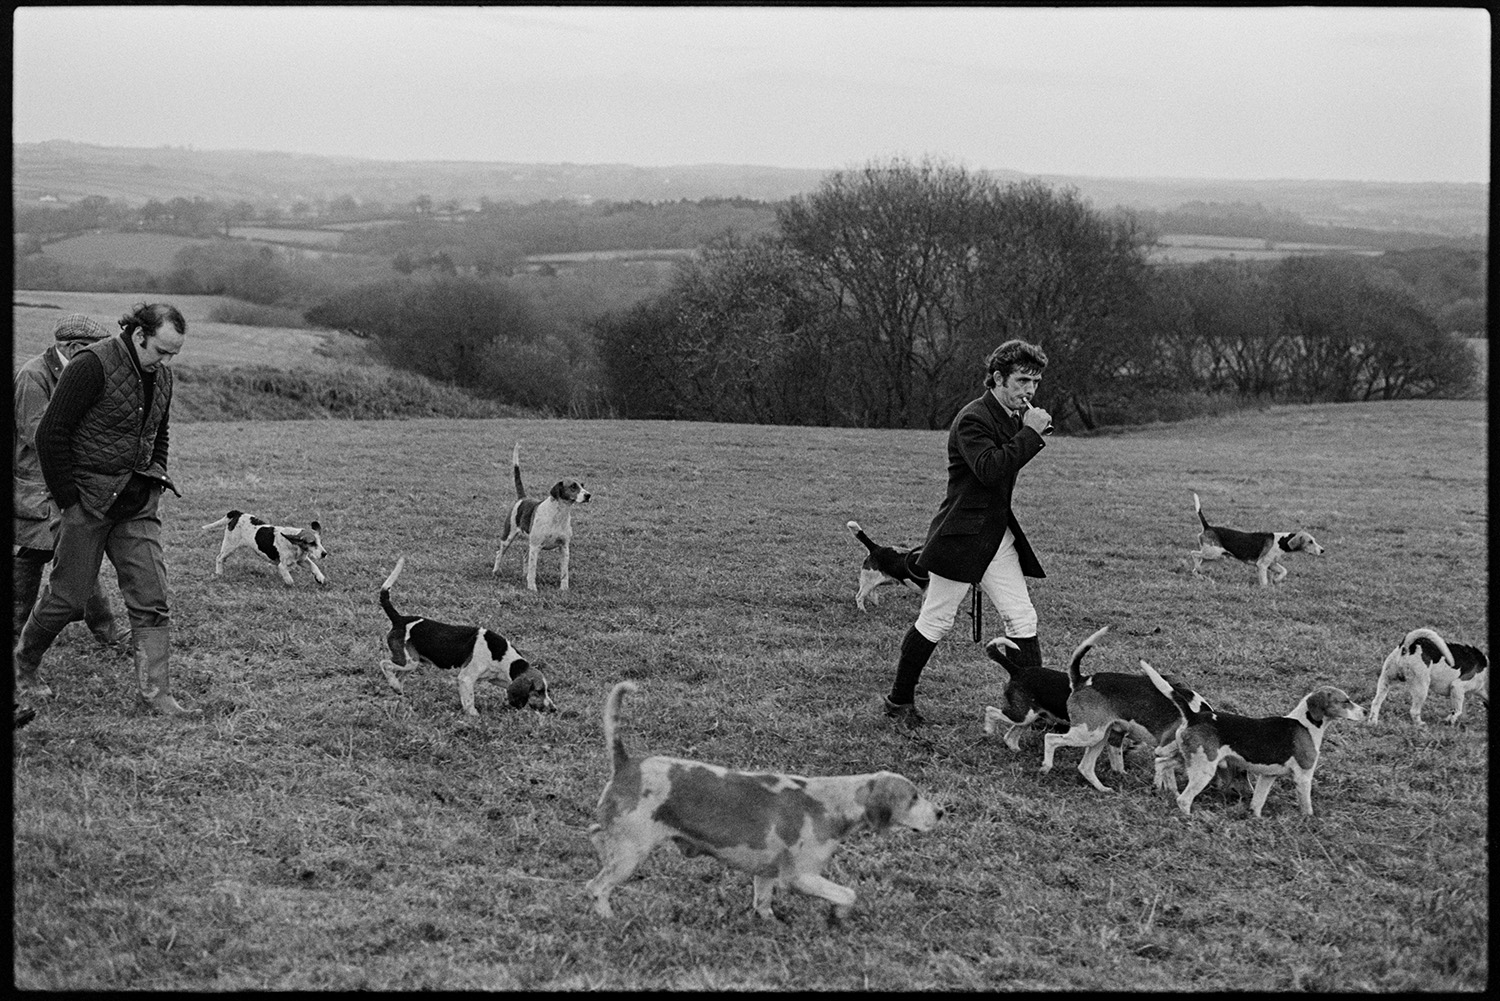 Foot Beagles on moor with followers. 
[Men hunting with Beagles on Hatherleigh Moor. One of the men is blowing a horn. A landscape of trees and fields can be seen in the background.]